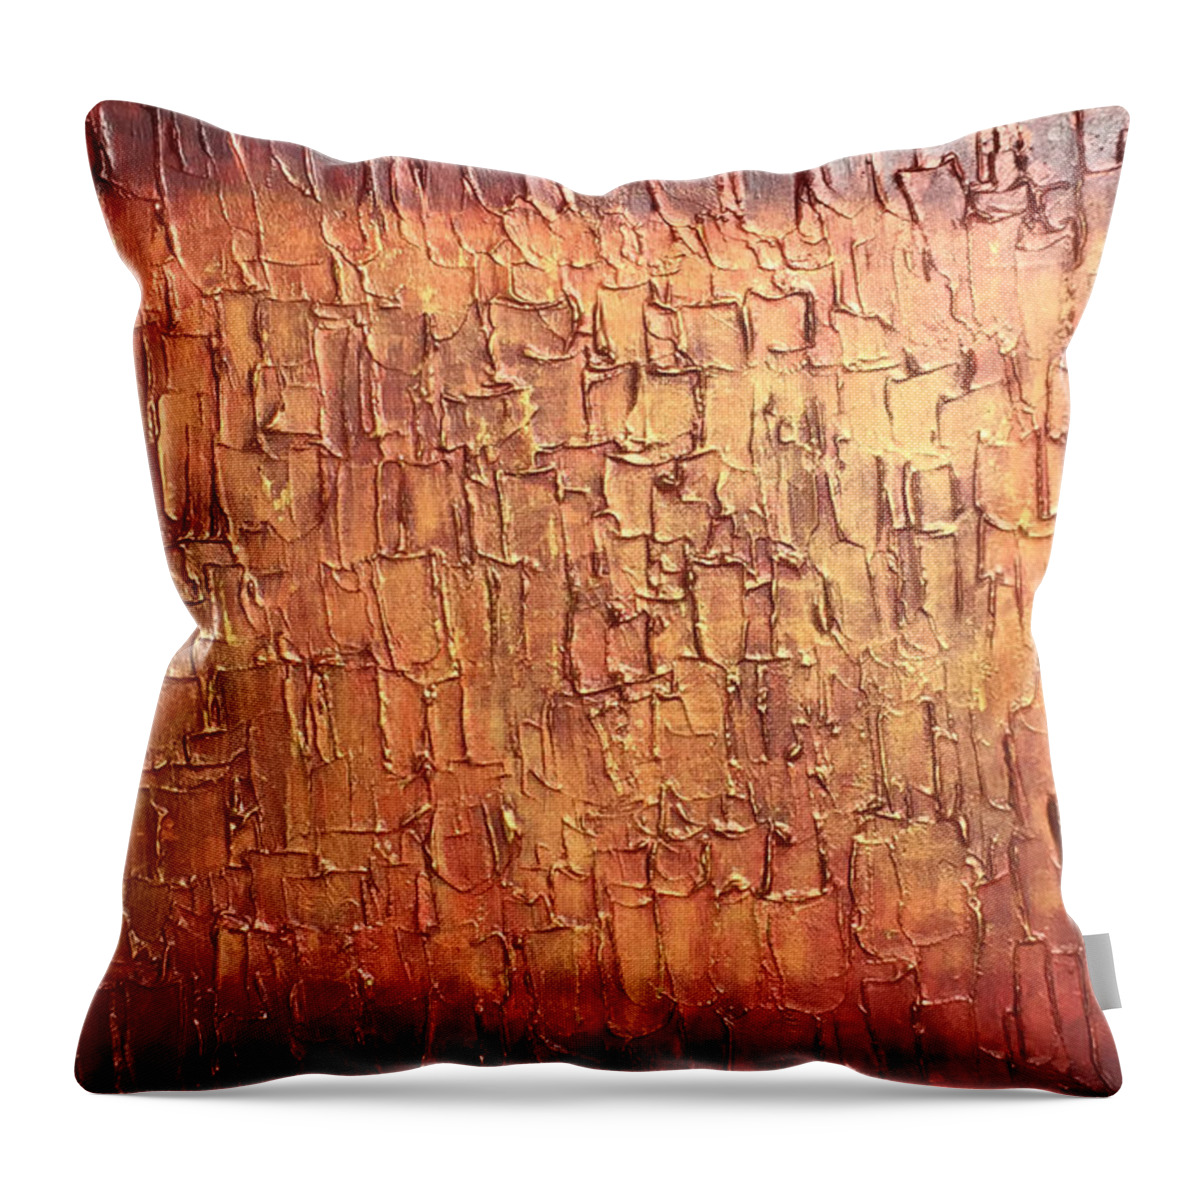 Gold Throw Pillow featuring the painting Glow by Linda Bailey